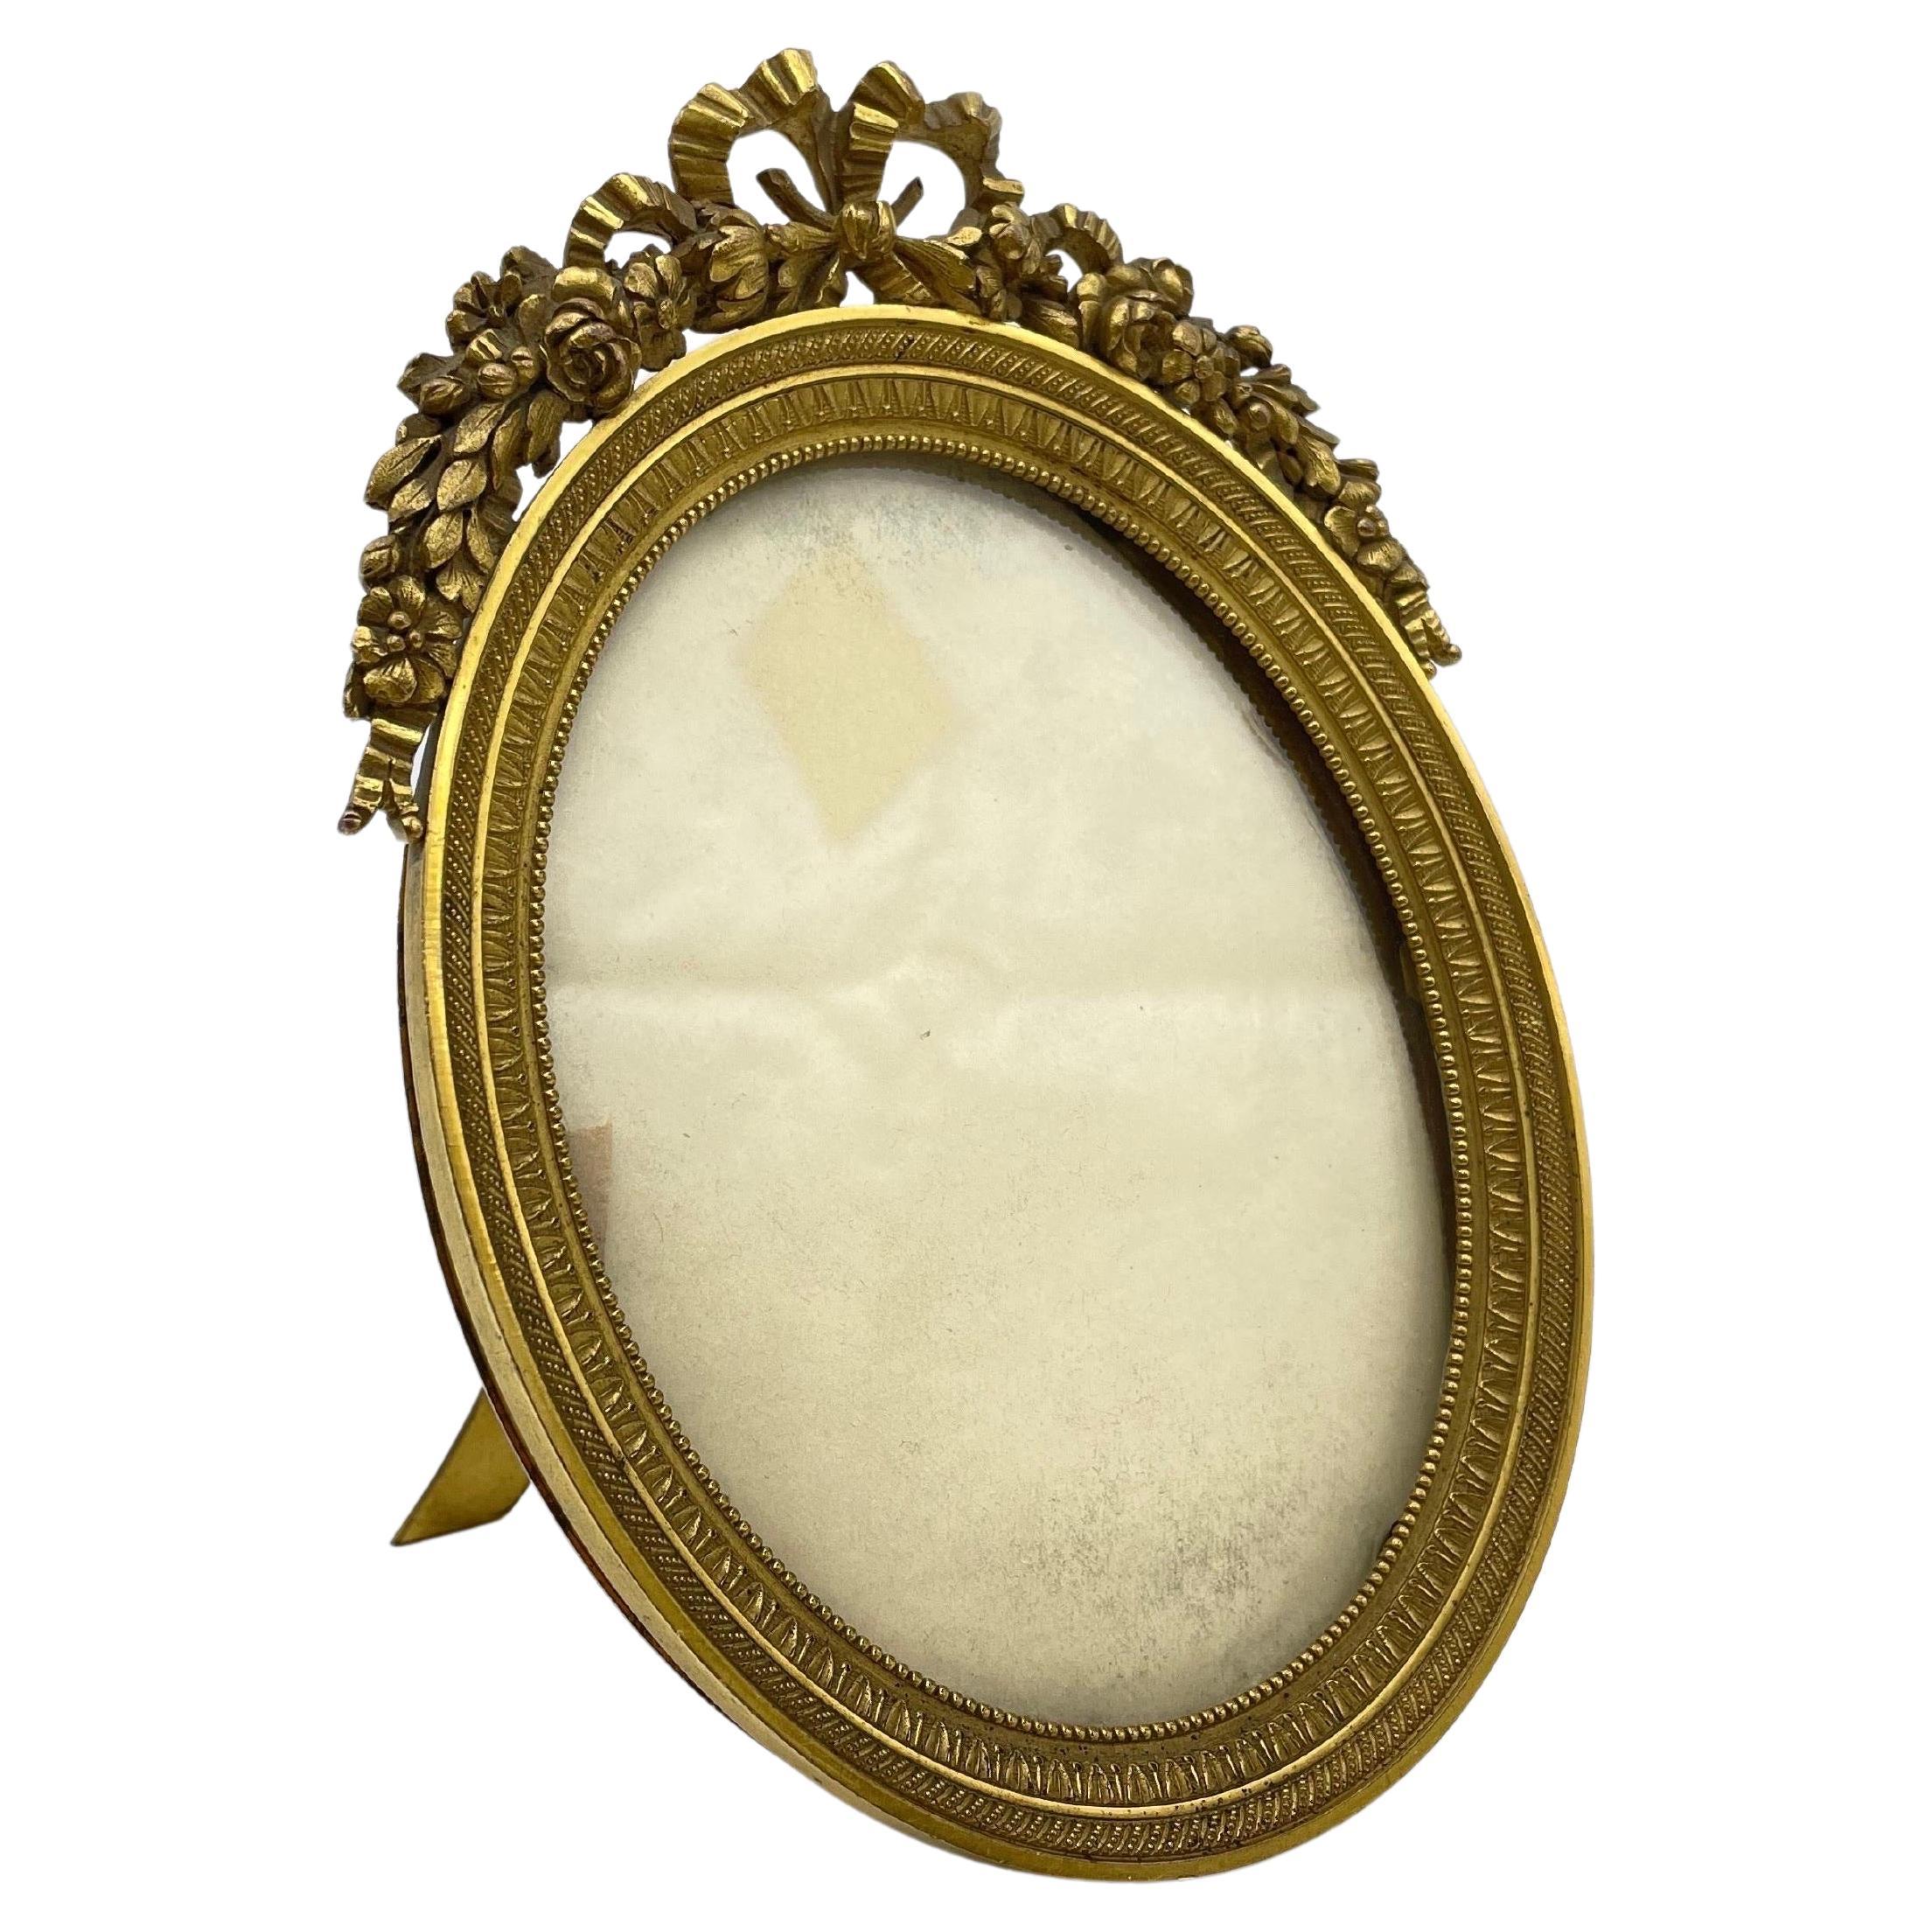 Noble Empire table picture frame, Gold, Oval